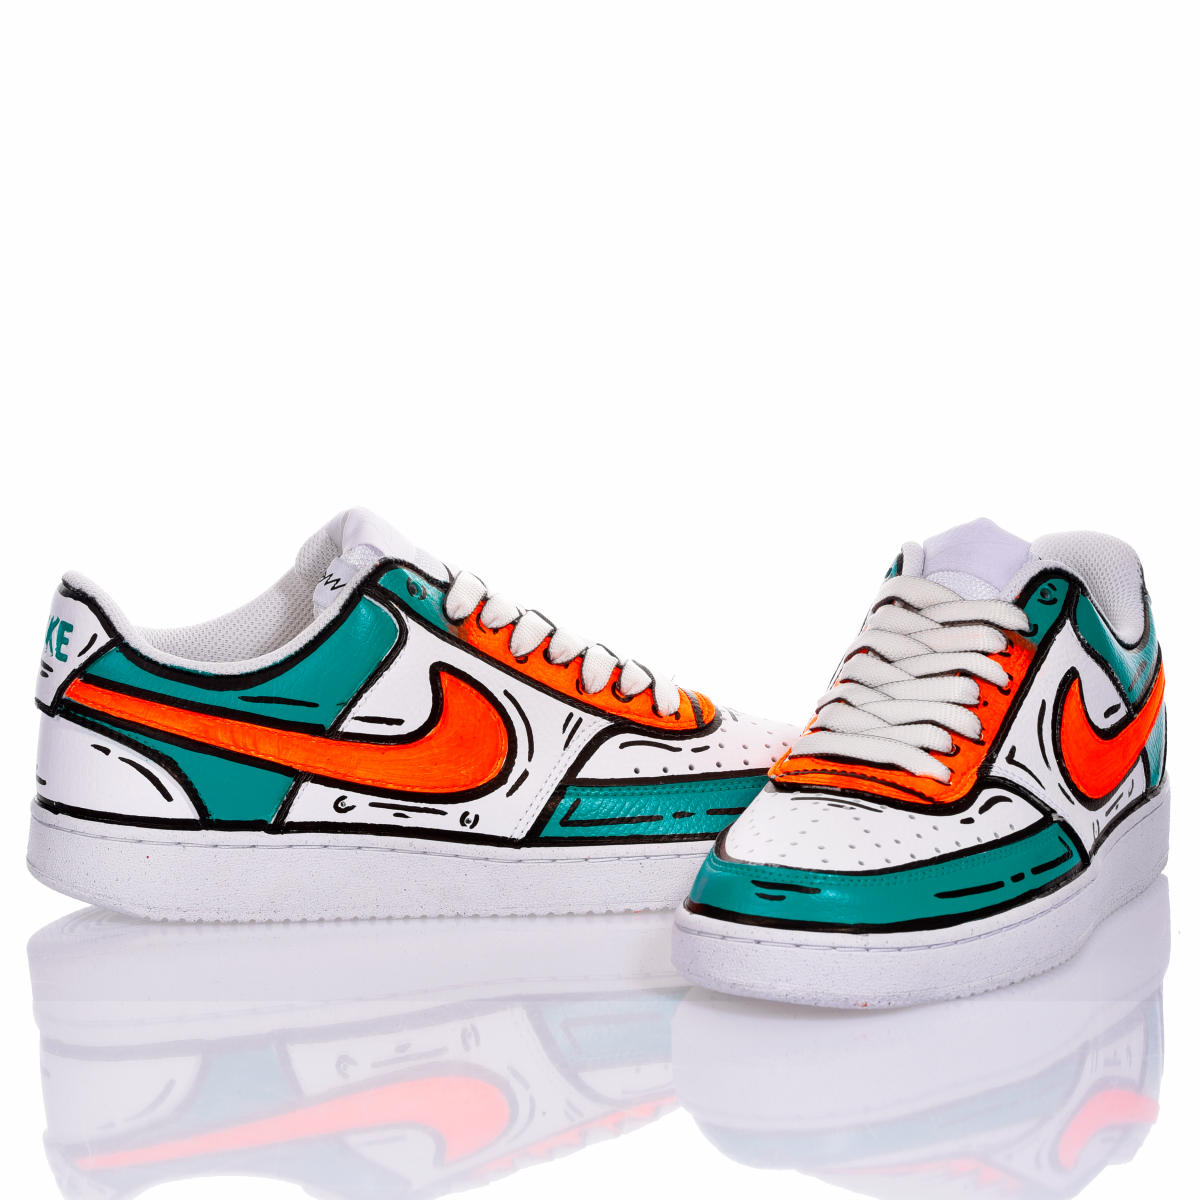 Nike Comics Ottanio Air force vision Special